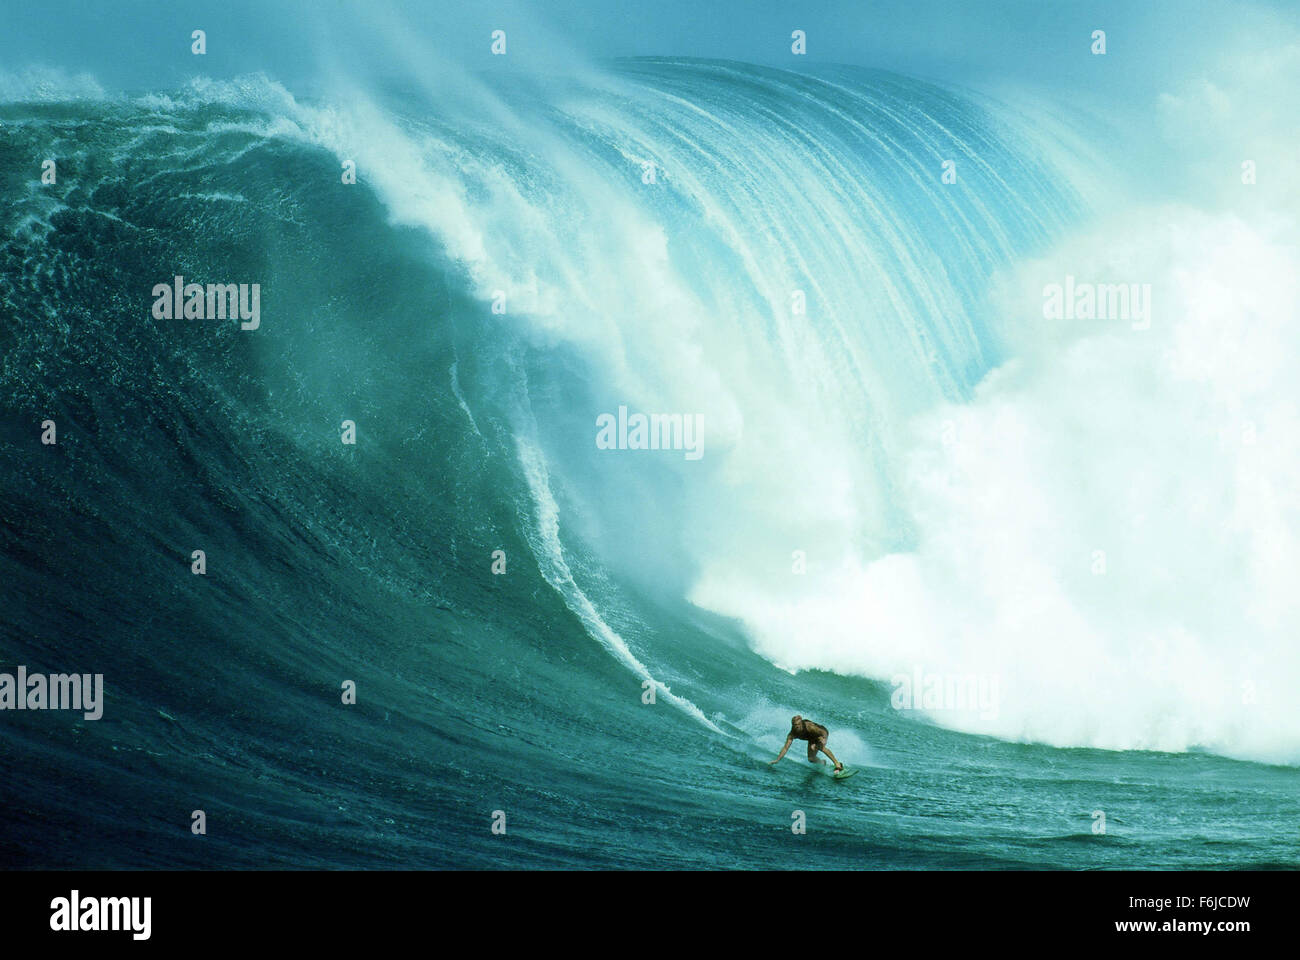 RELEASE DATE: June 11, 2004. MOVIE TITLE: Riding Giants. STUDIO: Forever Films. PLOT: Documentary detailing the origins and history of surf culture. PICTURED: . Stock Photo